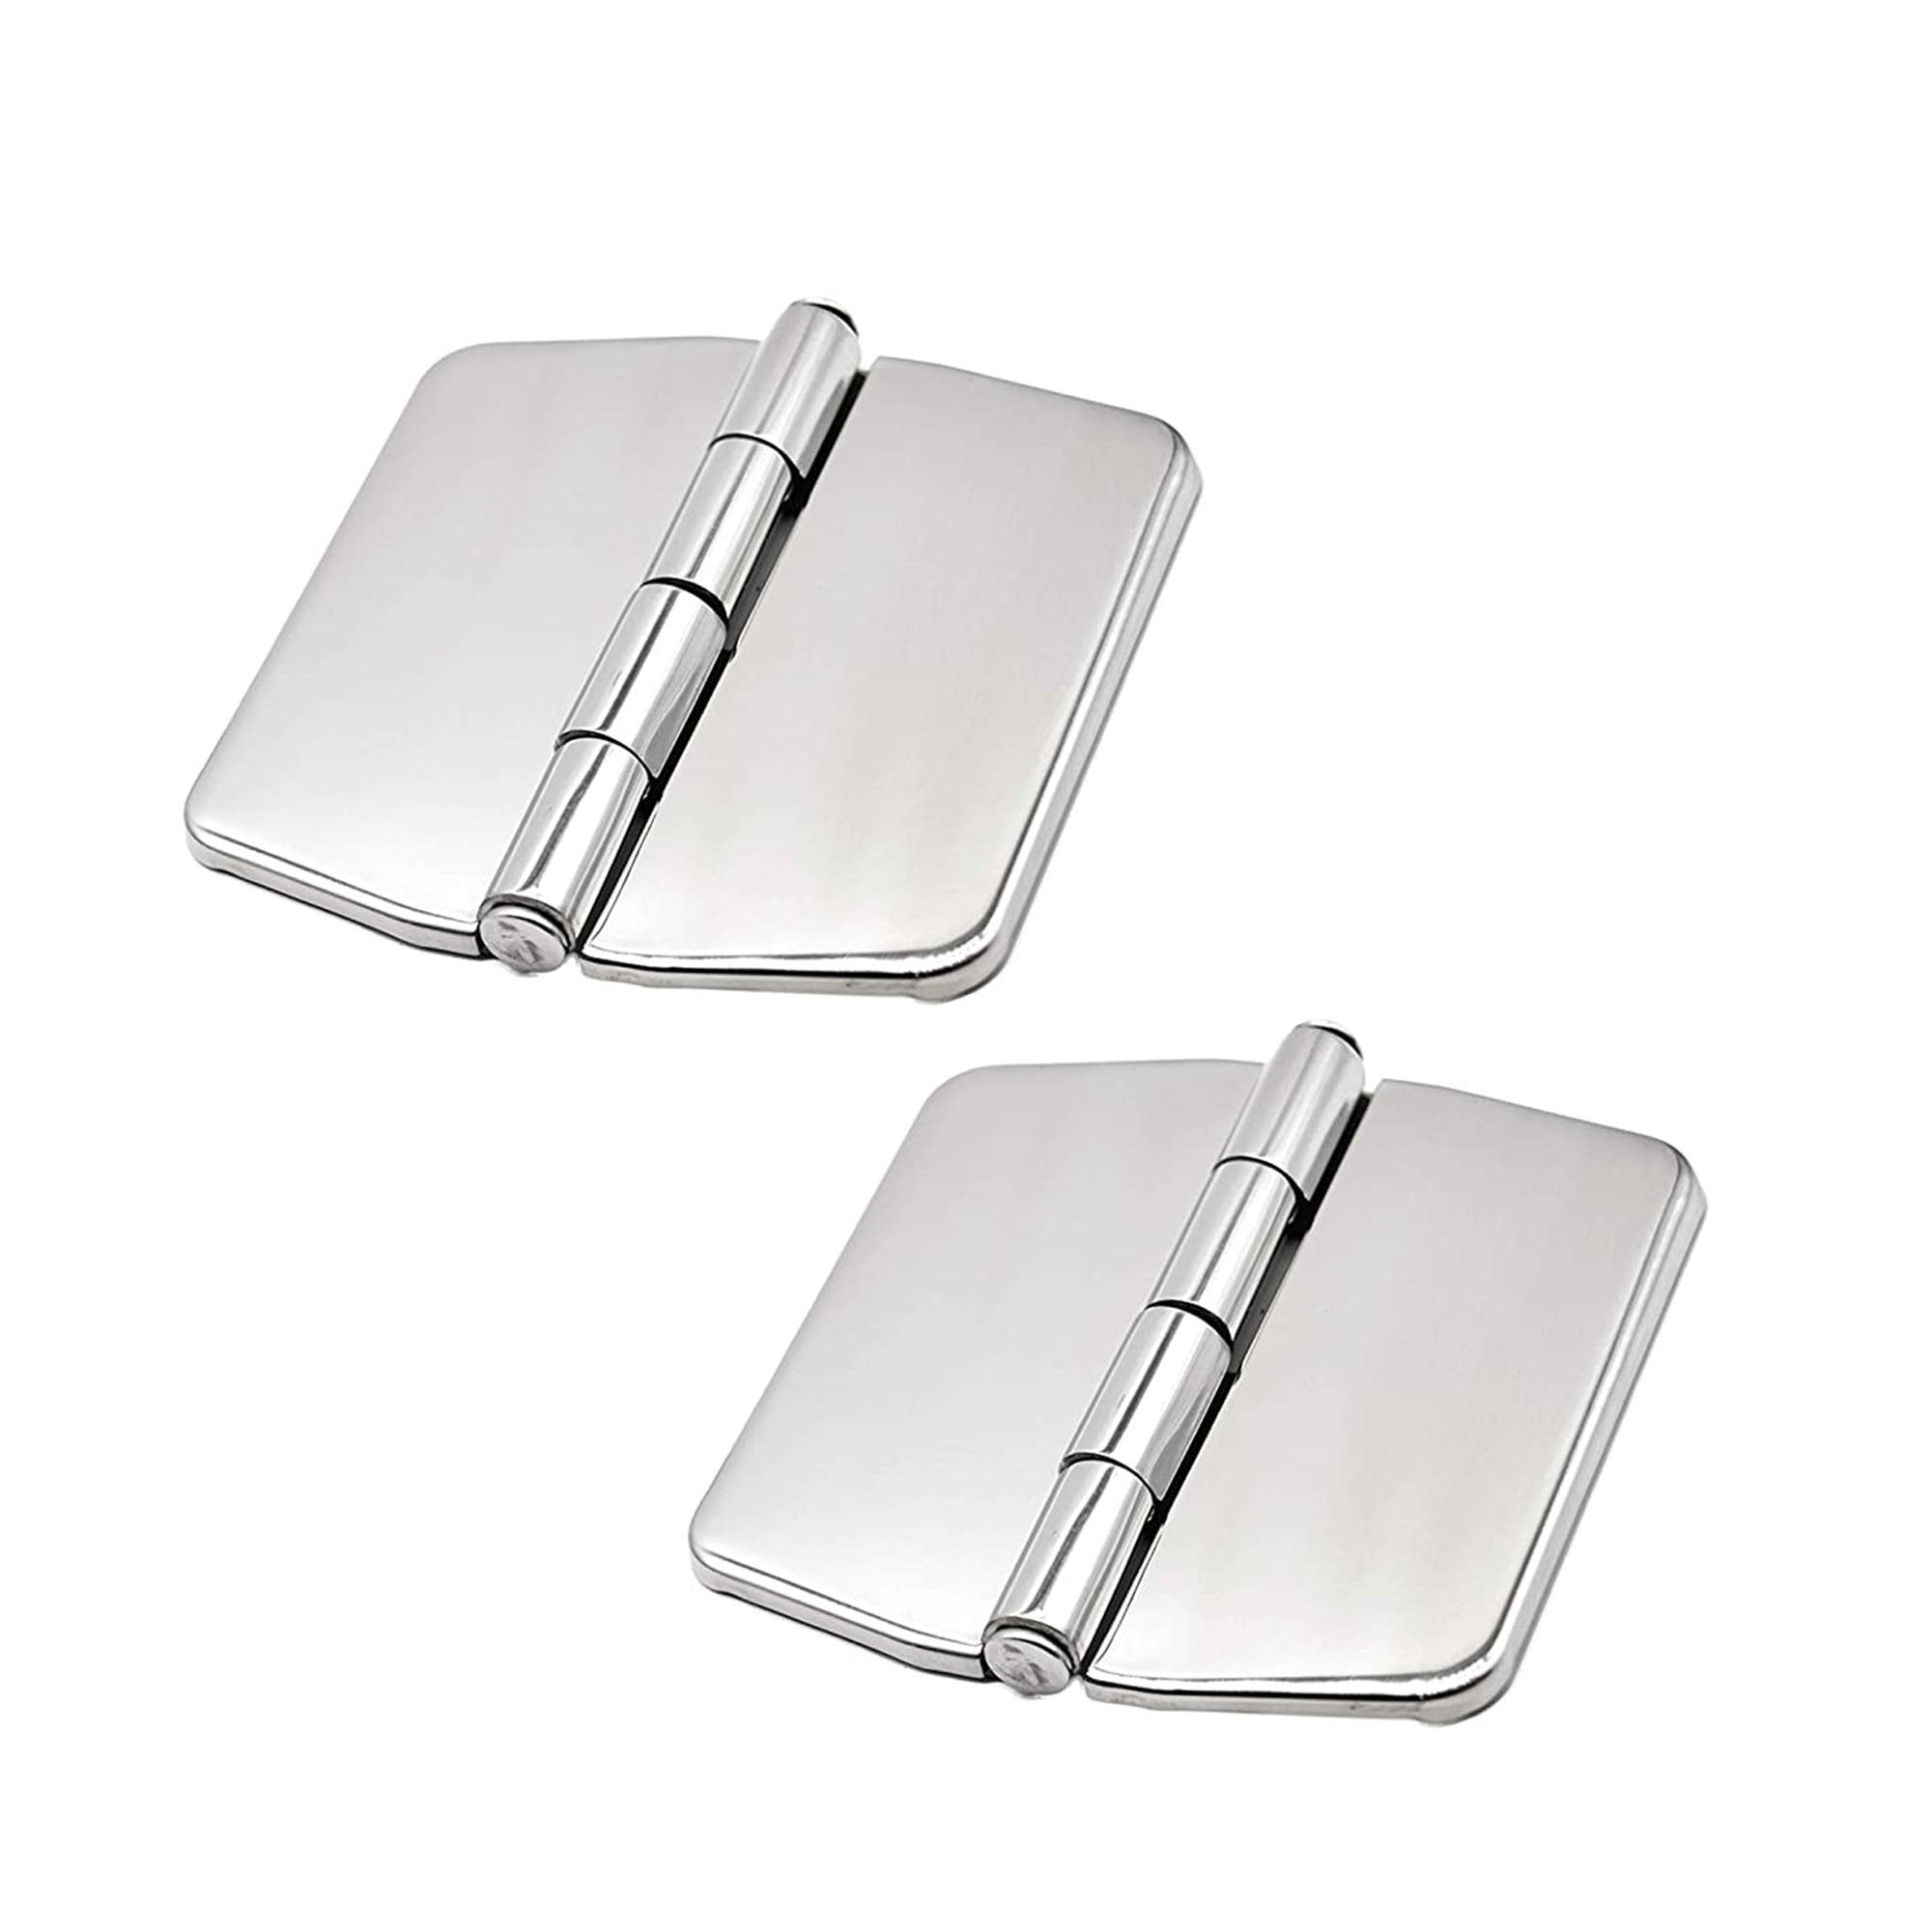 Marine City A Pair of 316 Stainless-Steel 6 Point Fixing Covered Strap Hinge with Cover Caps (Size:3.0” ×2-3/4”)